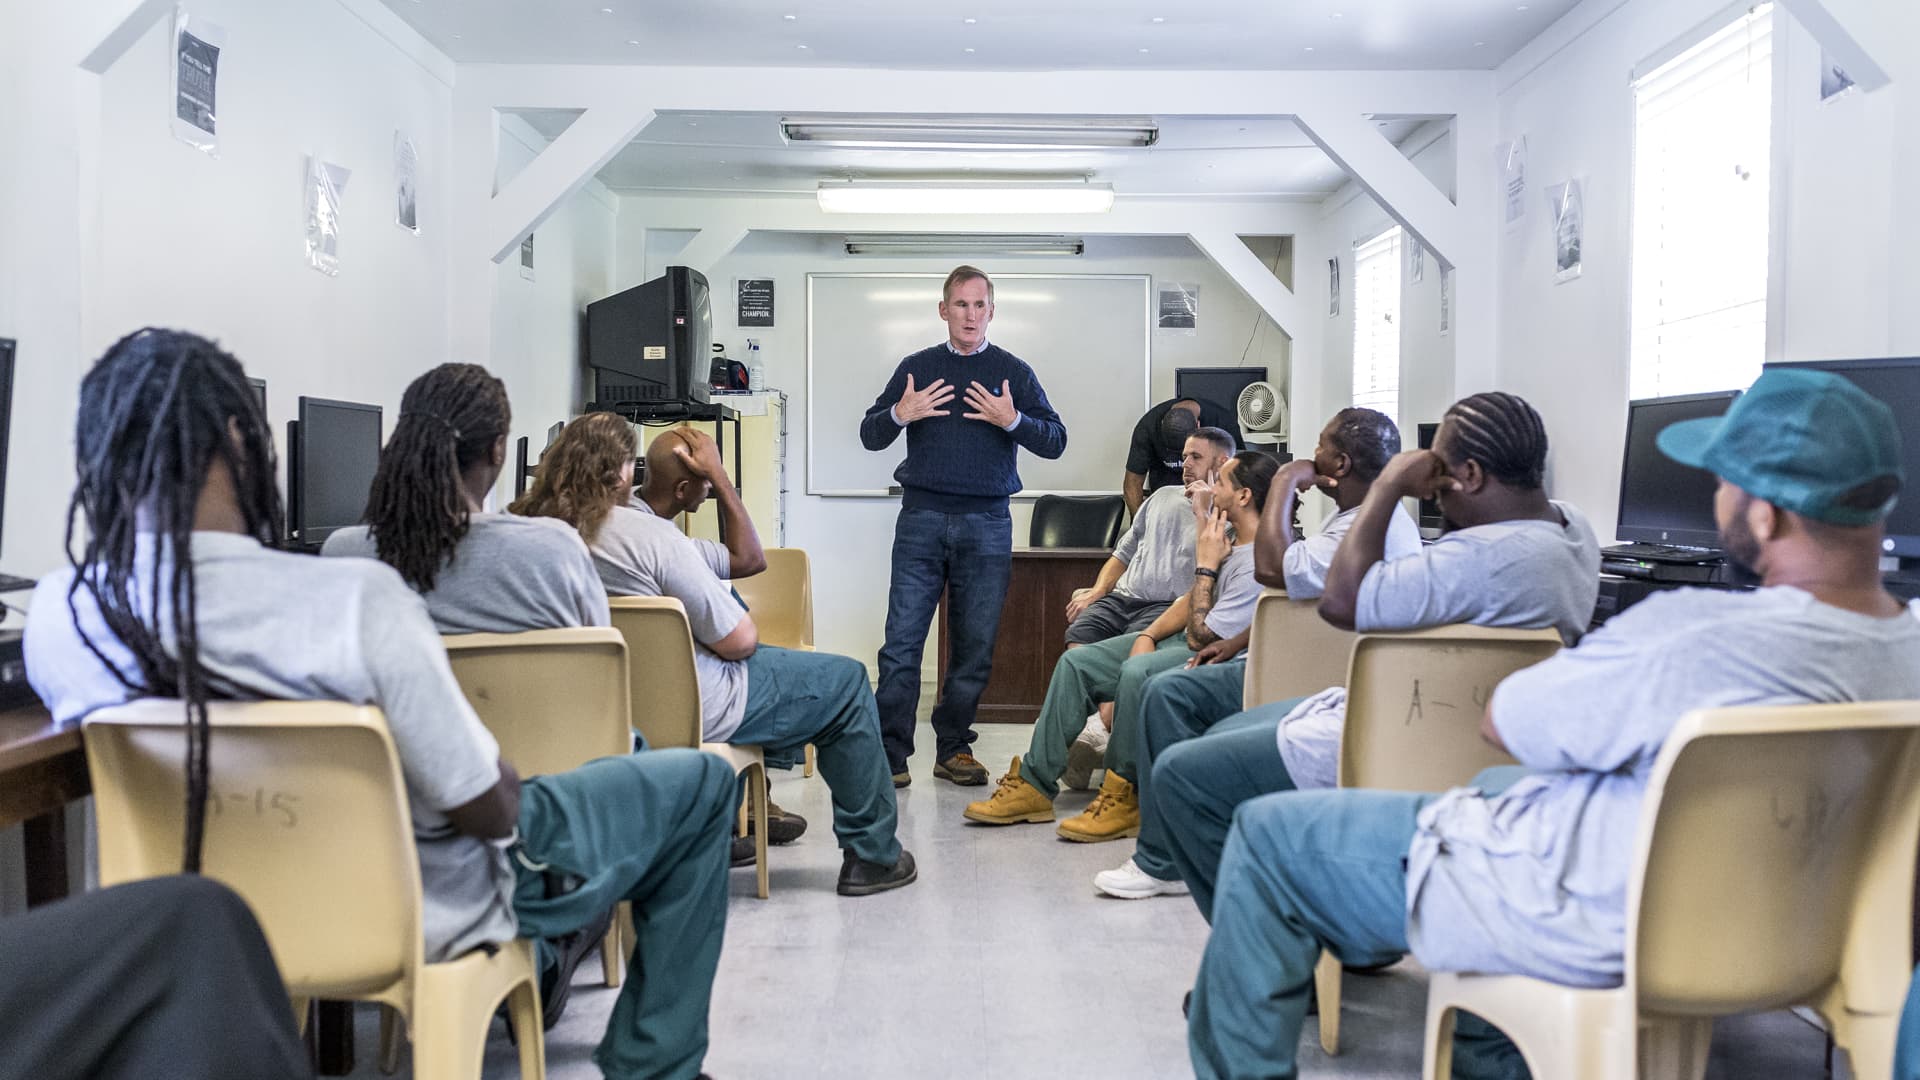 Brian Hamilton, director of Inmates to Entrepreneurs, teaches a one-day course at Gaston Correctional Center in Dallas, N.C. in 2018.